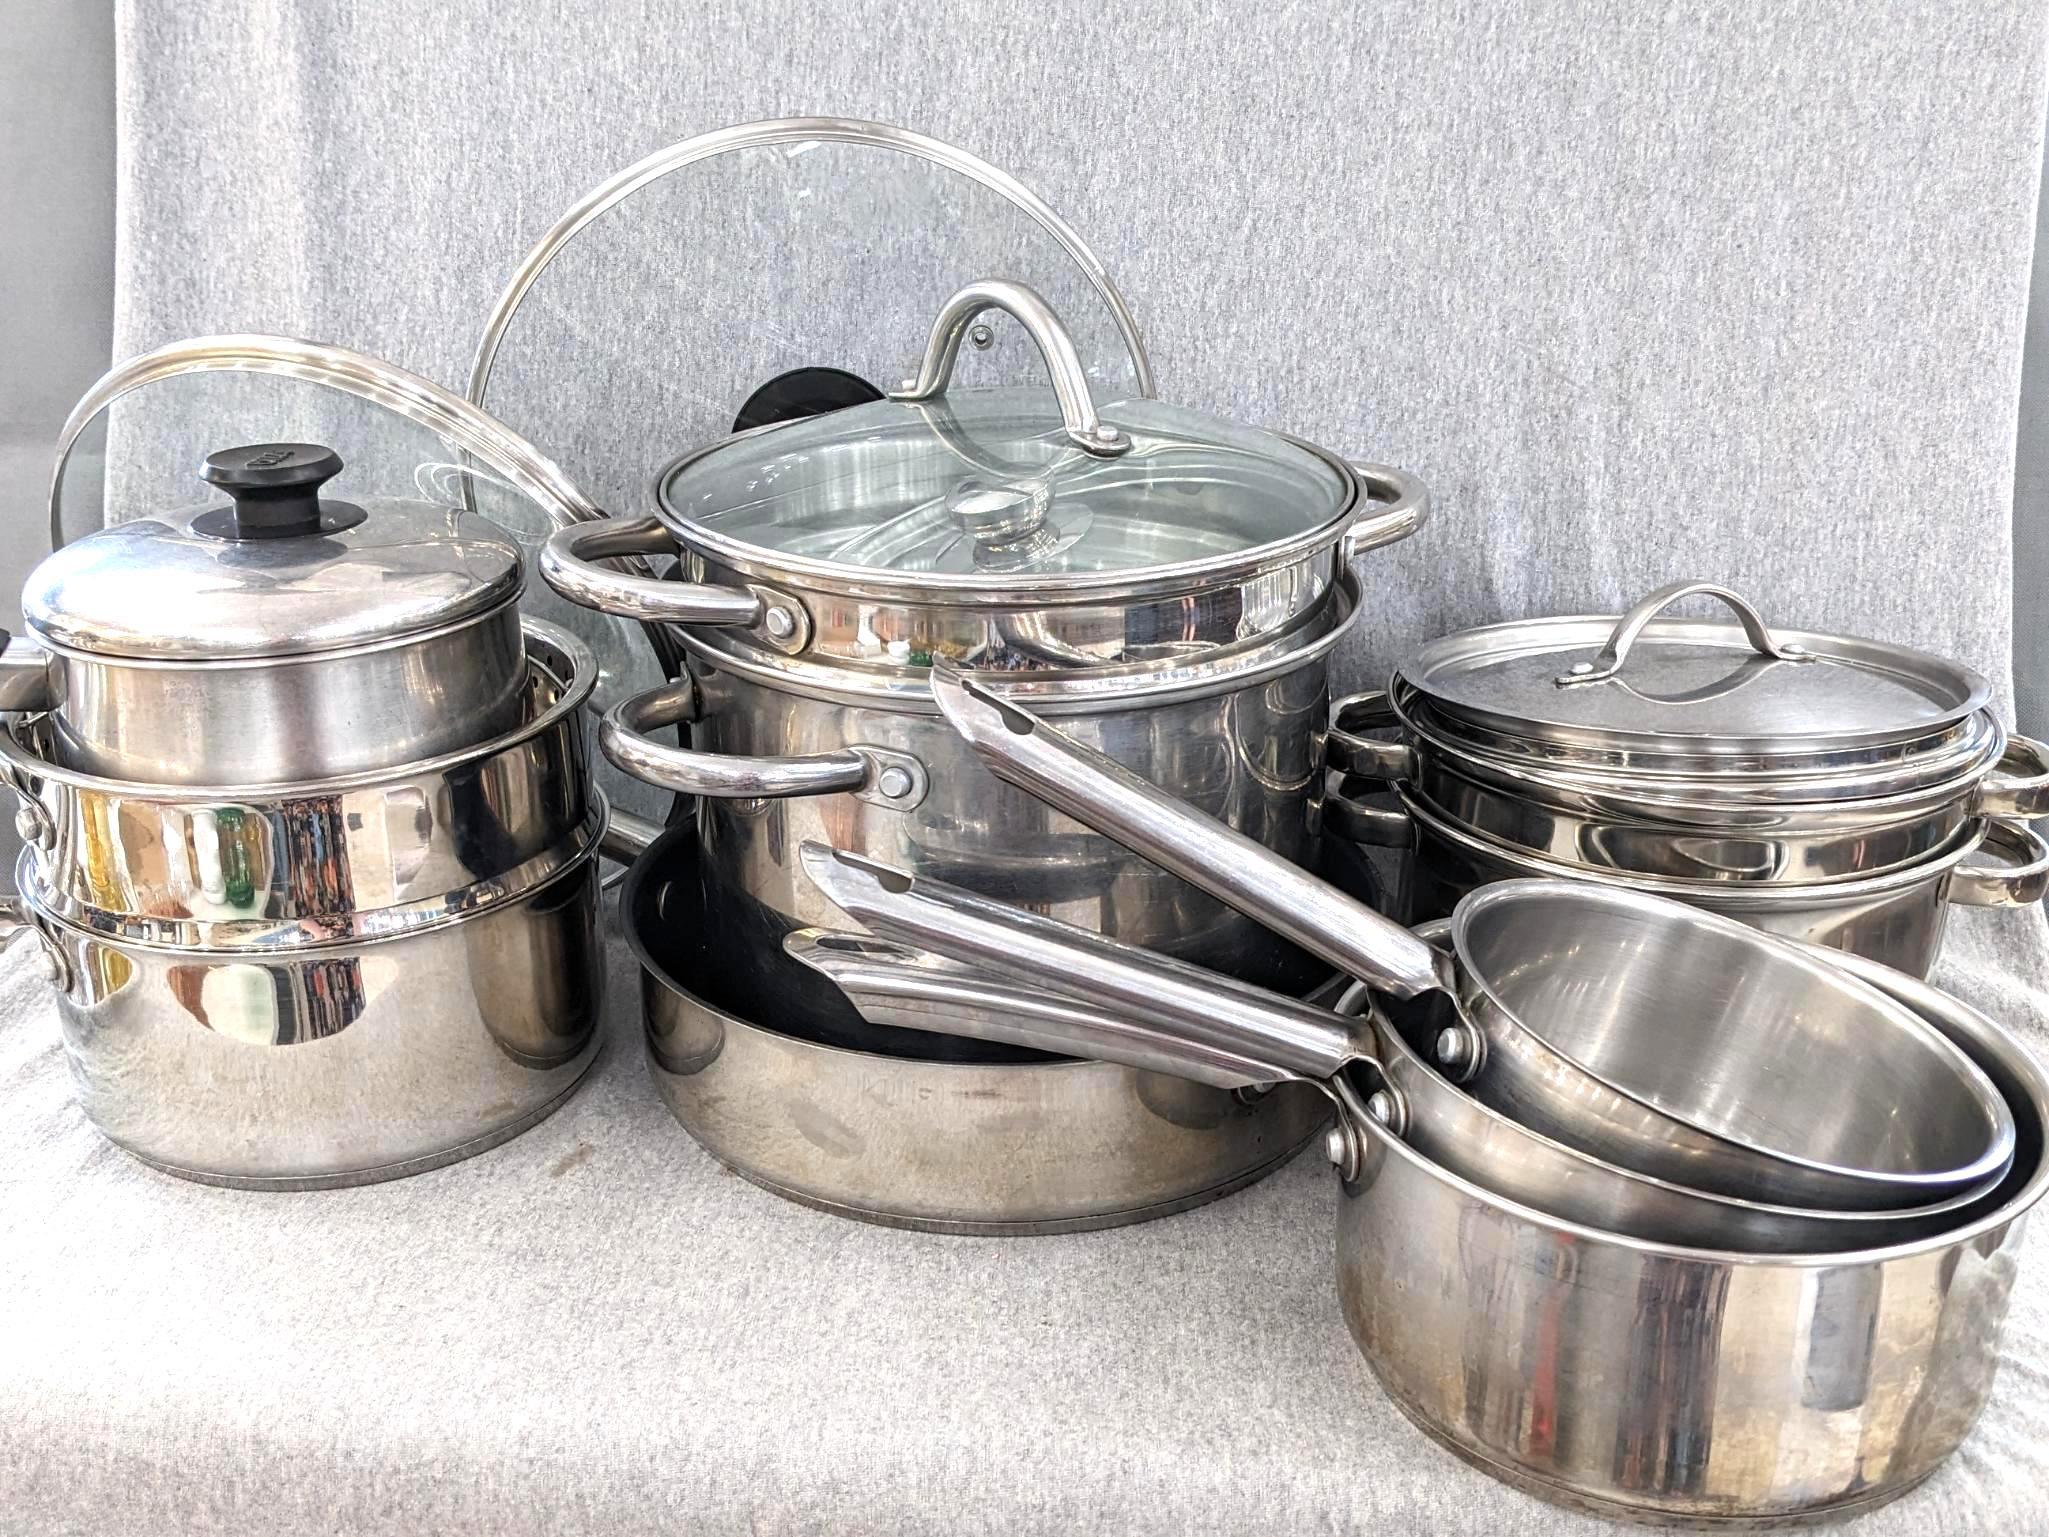 wolfgang puck cookware cafe collection